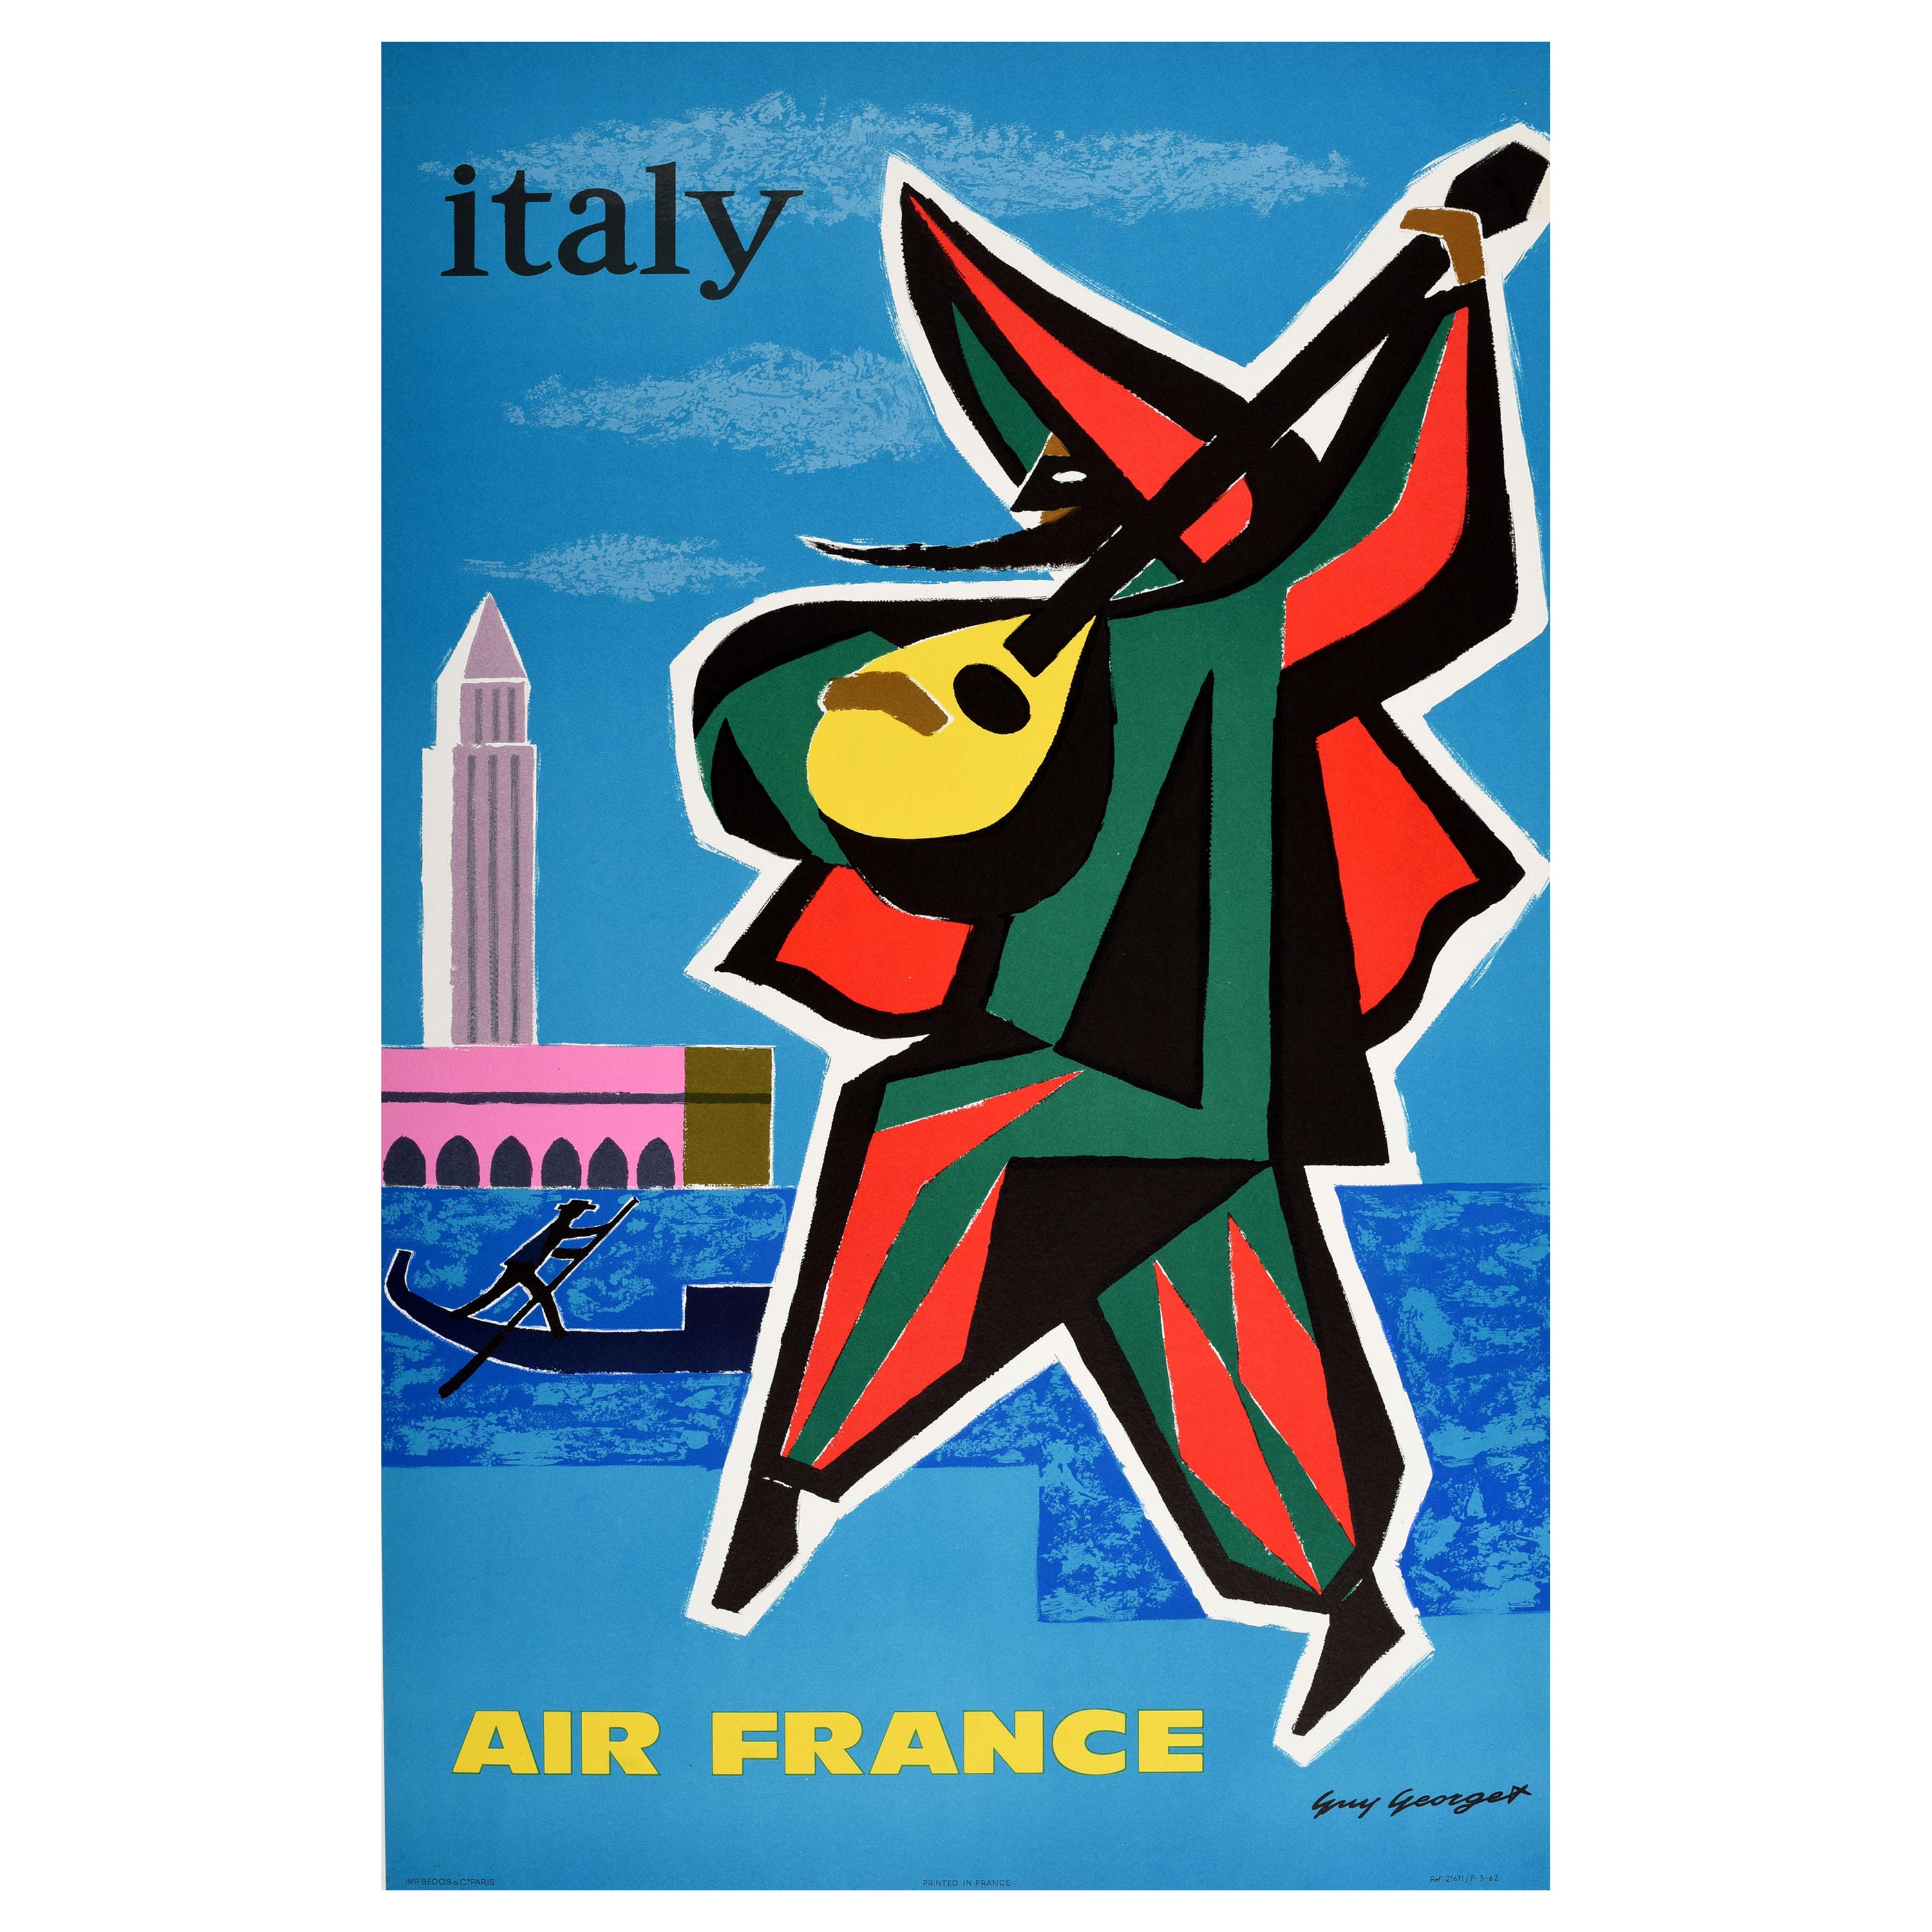 Original Vintage Travel Advertising Poster Italy Venice Air France Guy Georget For Sale